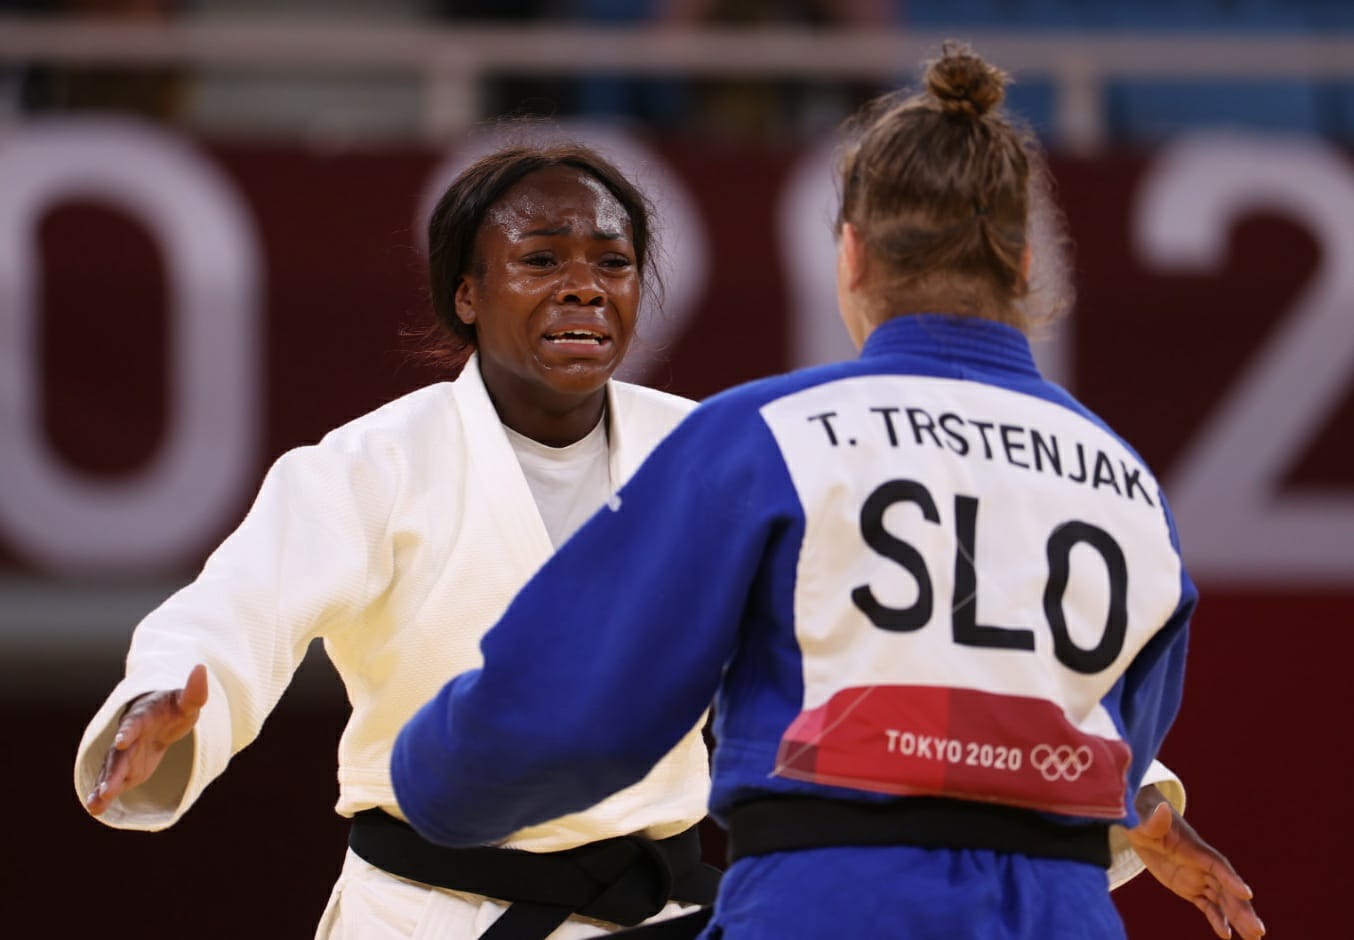 EUROPE ACCUMULATE FIVE MEDALS INCLUDING ANTICIPATED OLYMPIC TITLE